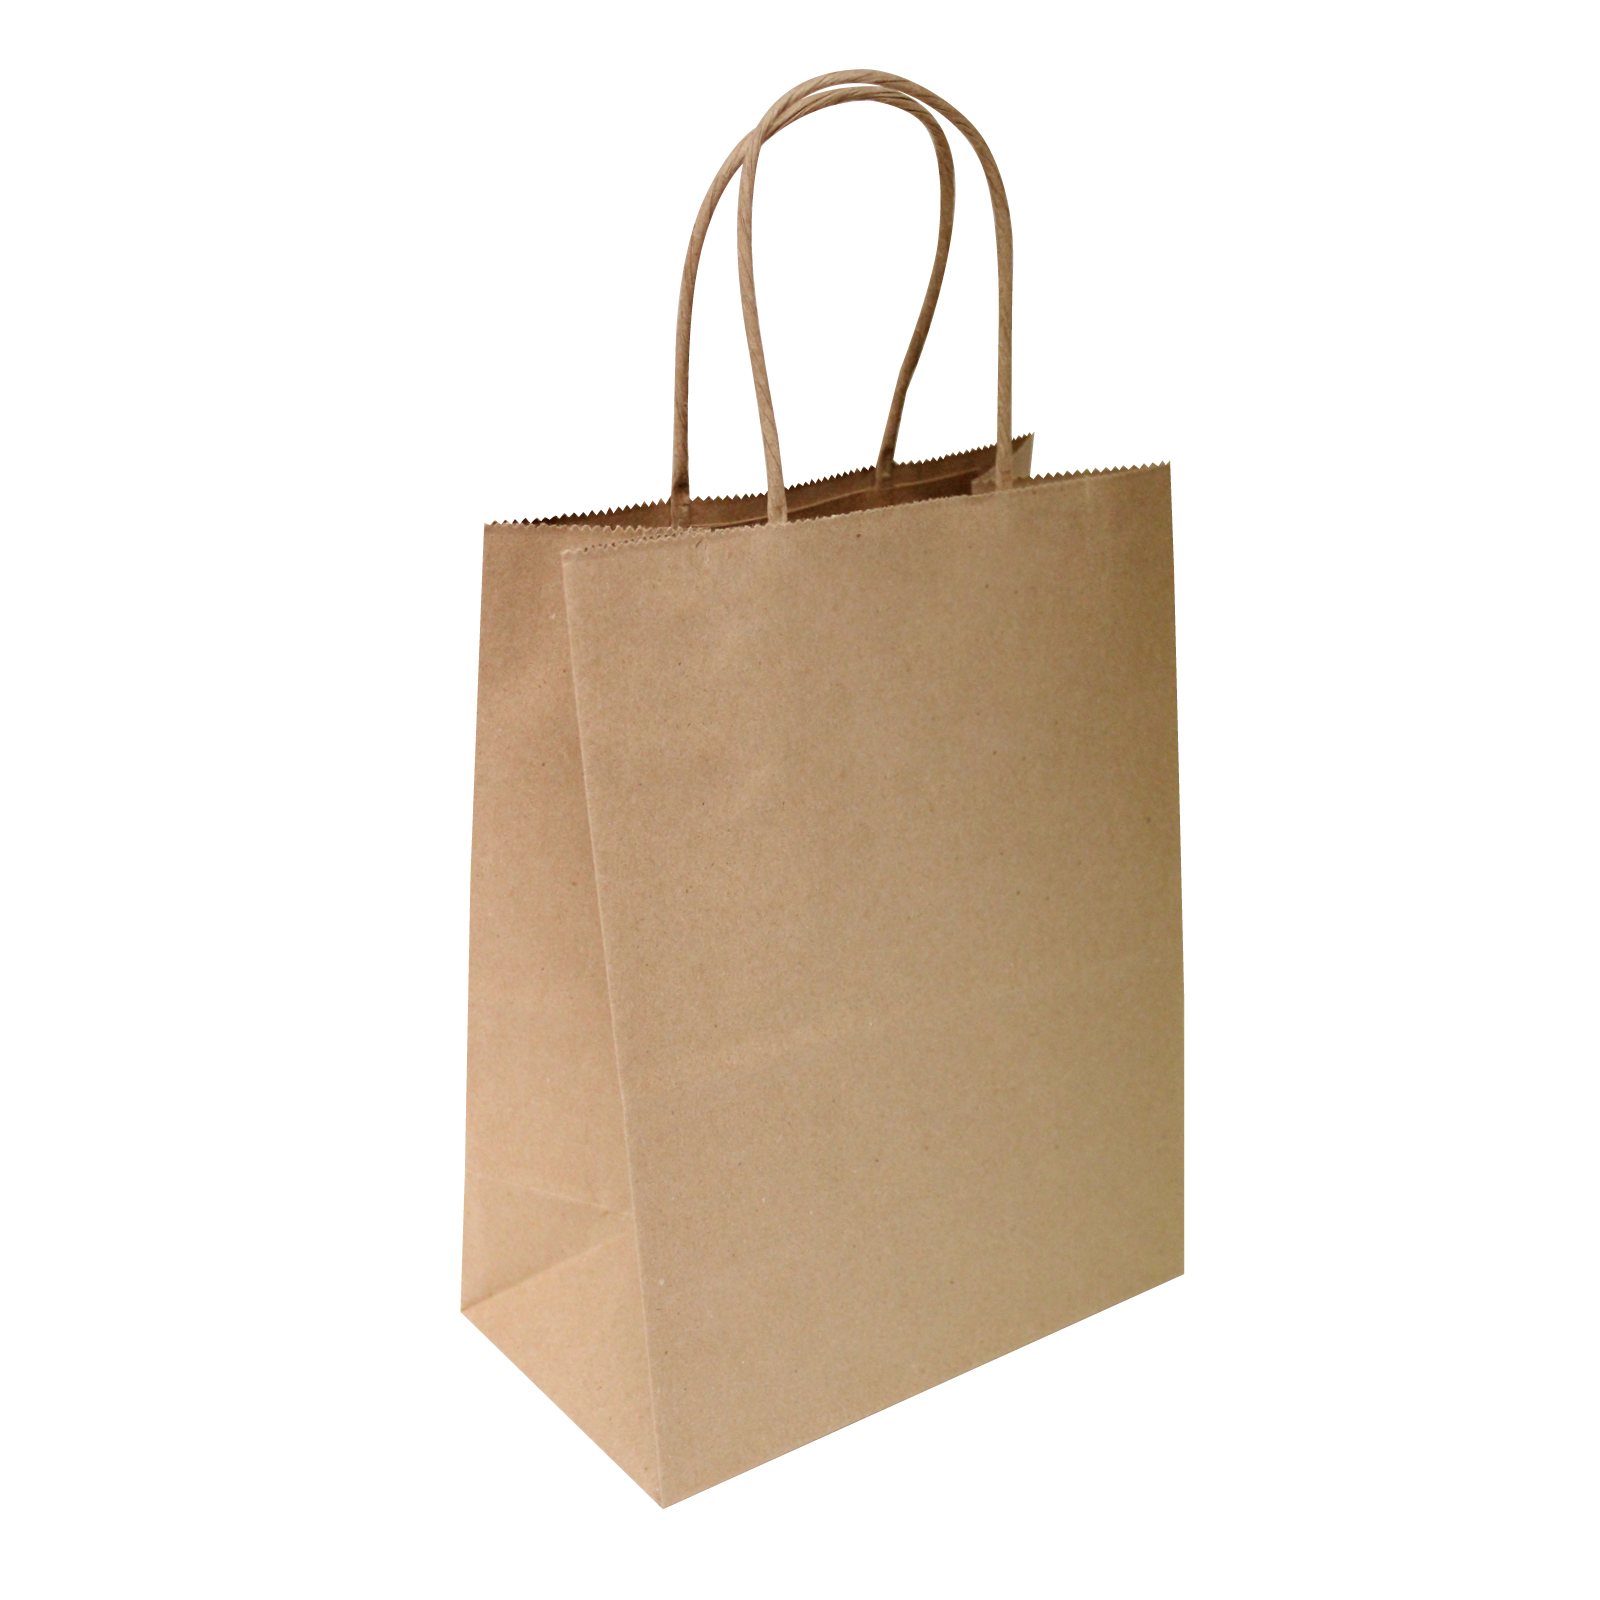 8"x4.75"x10", 50 Piece, Natural Brown Kraft Paper Bags, Shopping, Mechandise, Party, Gift Bags - image 1 of 4